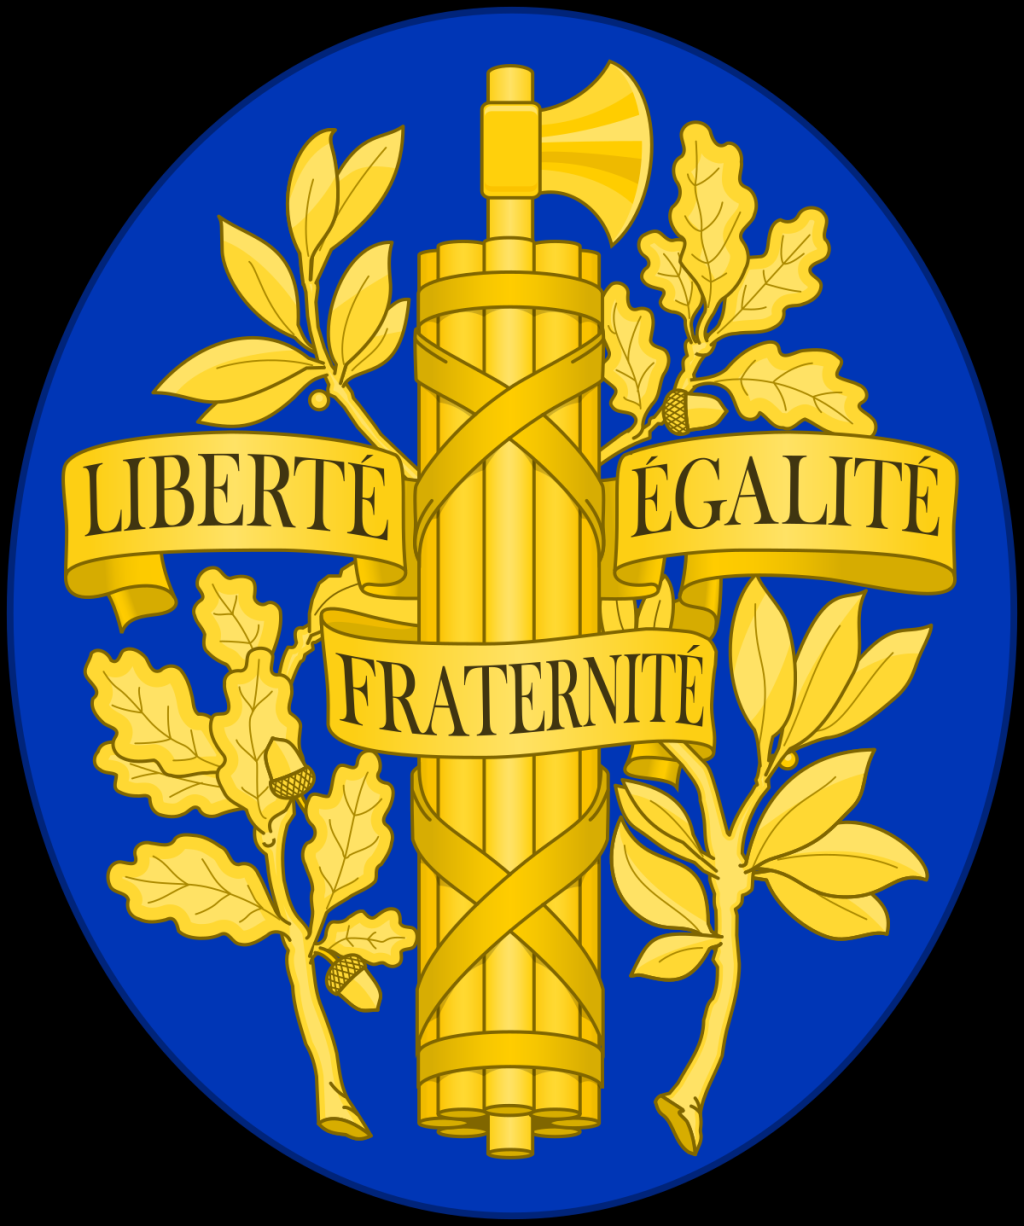 french politics explained simply - Politics of France - Wikipedia